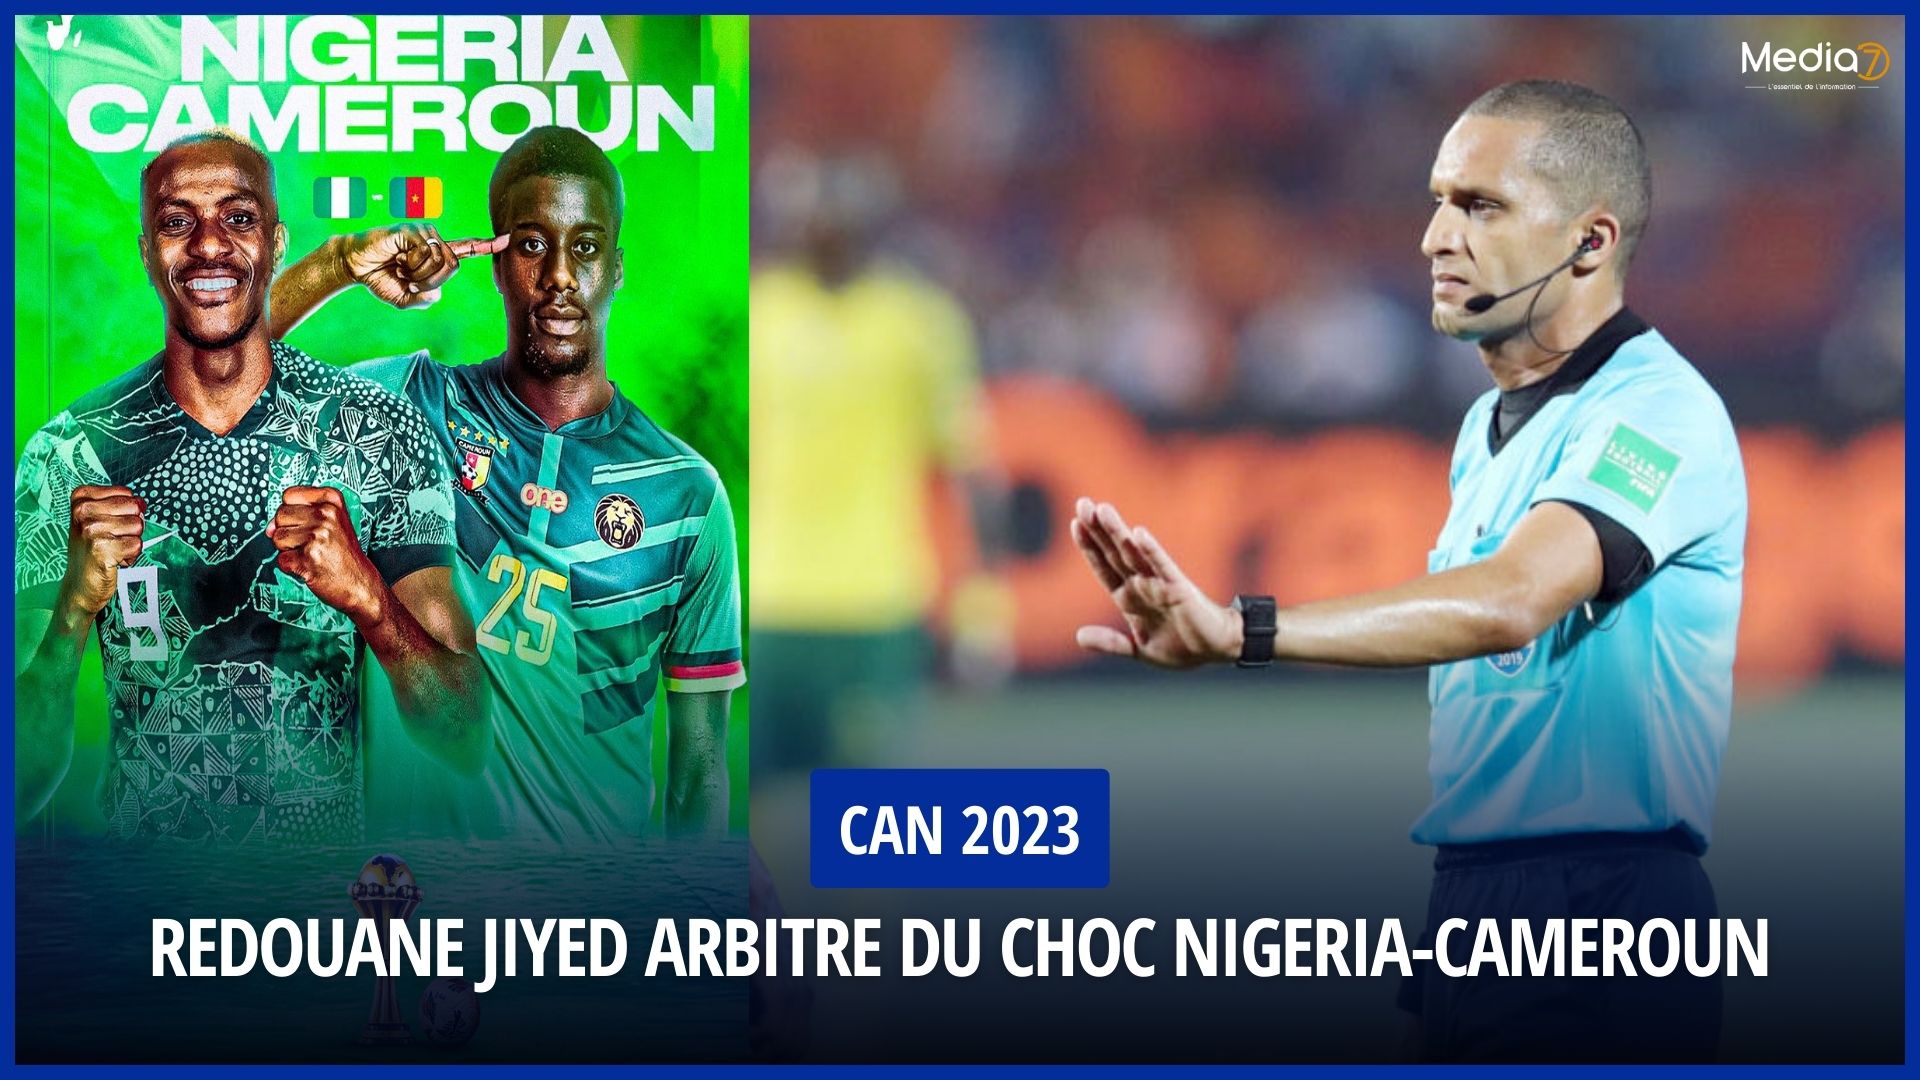 CAN 2023: Redouane Jiyed Referee of the Nigeria-Cameroon Shock - Media7